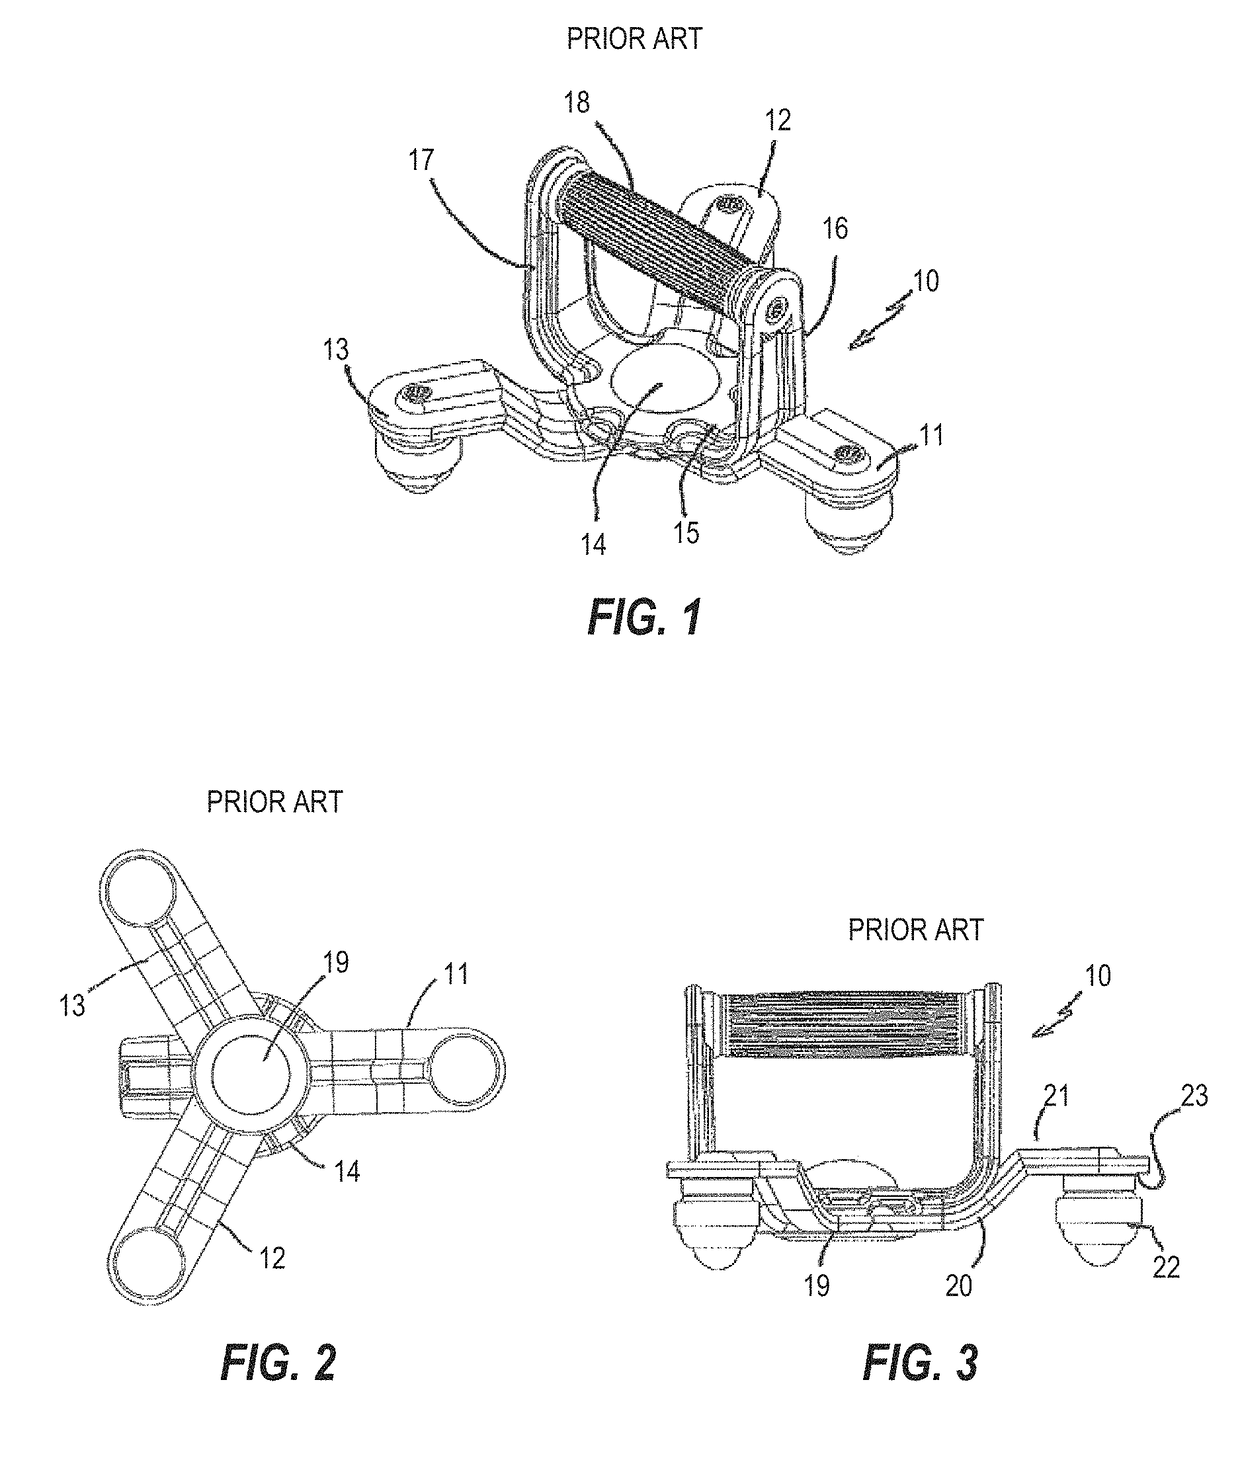 Handheld resistance exercise device and methods of exercising therewith